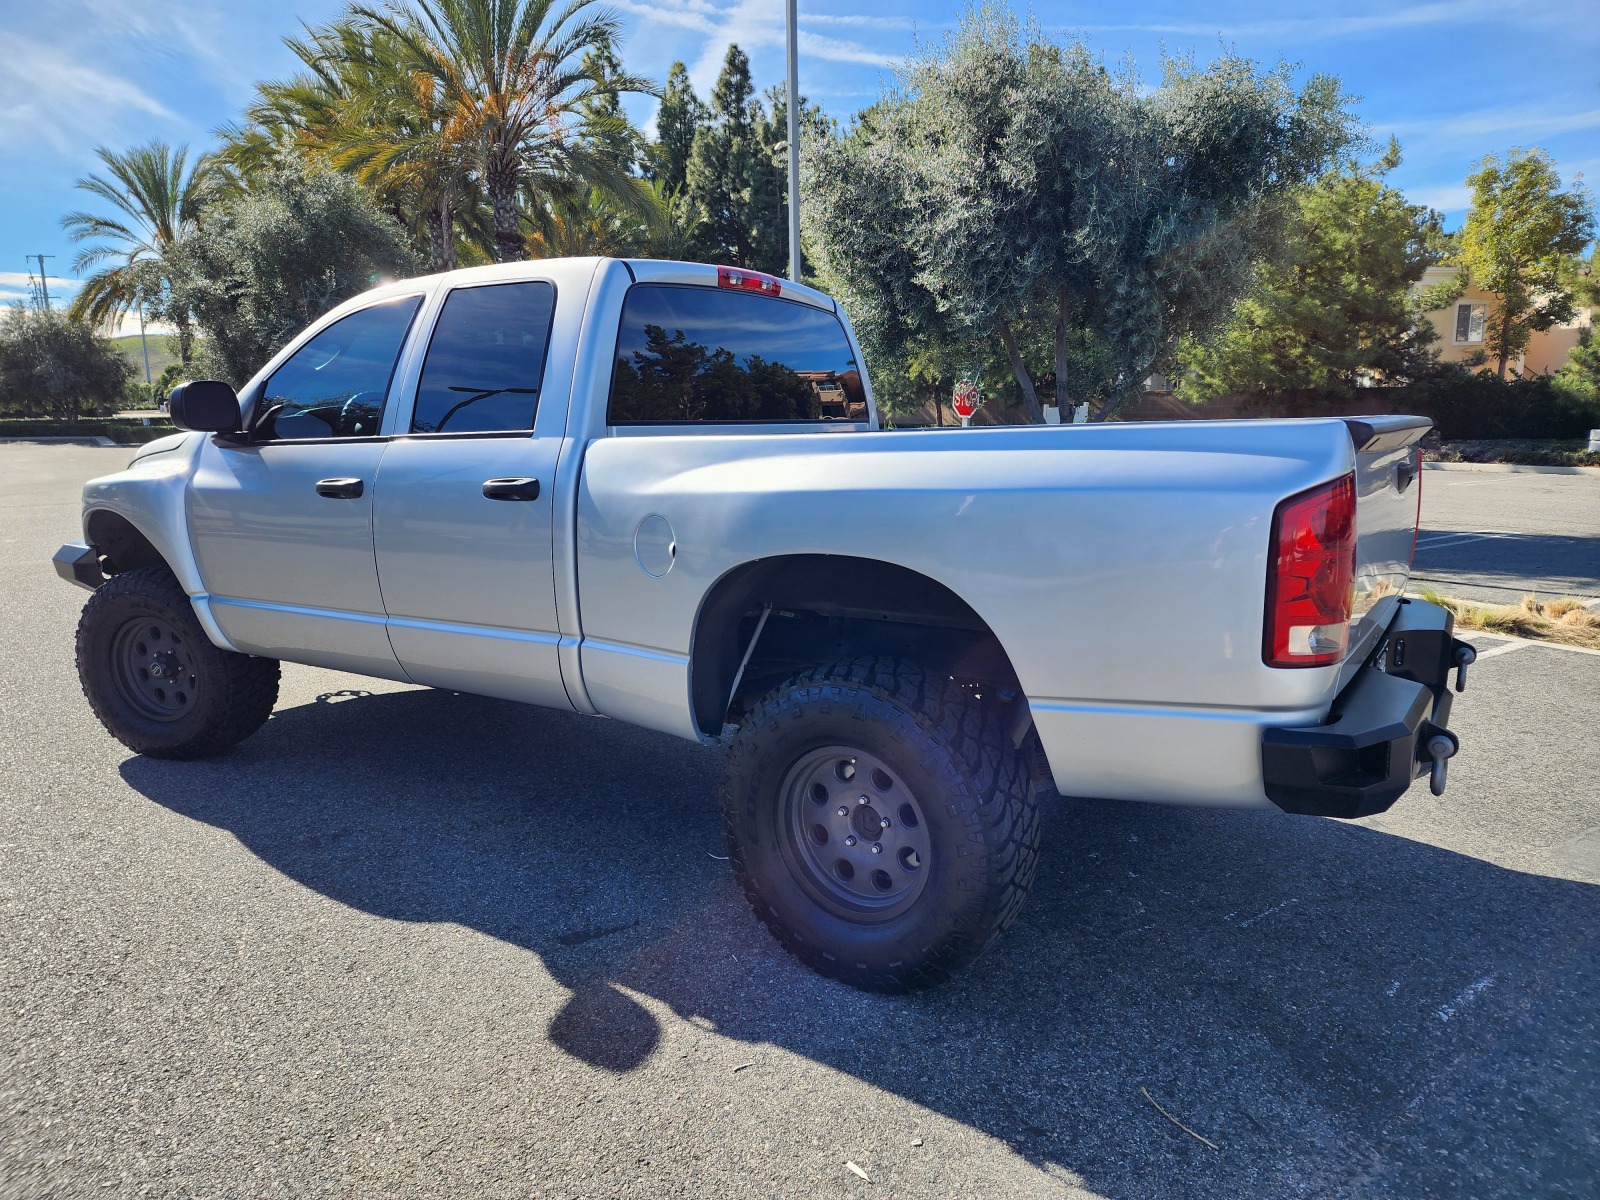 For Sale: *REDUCED* Clean 2006 Ram 1500 SLT 4x4 5.7L V8 | $20k+ UPGRADES | Well Maintained | Low Miles! - photo5